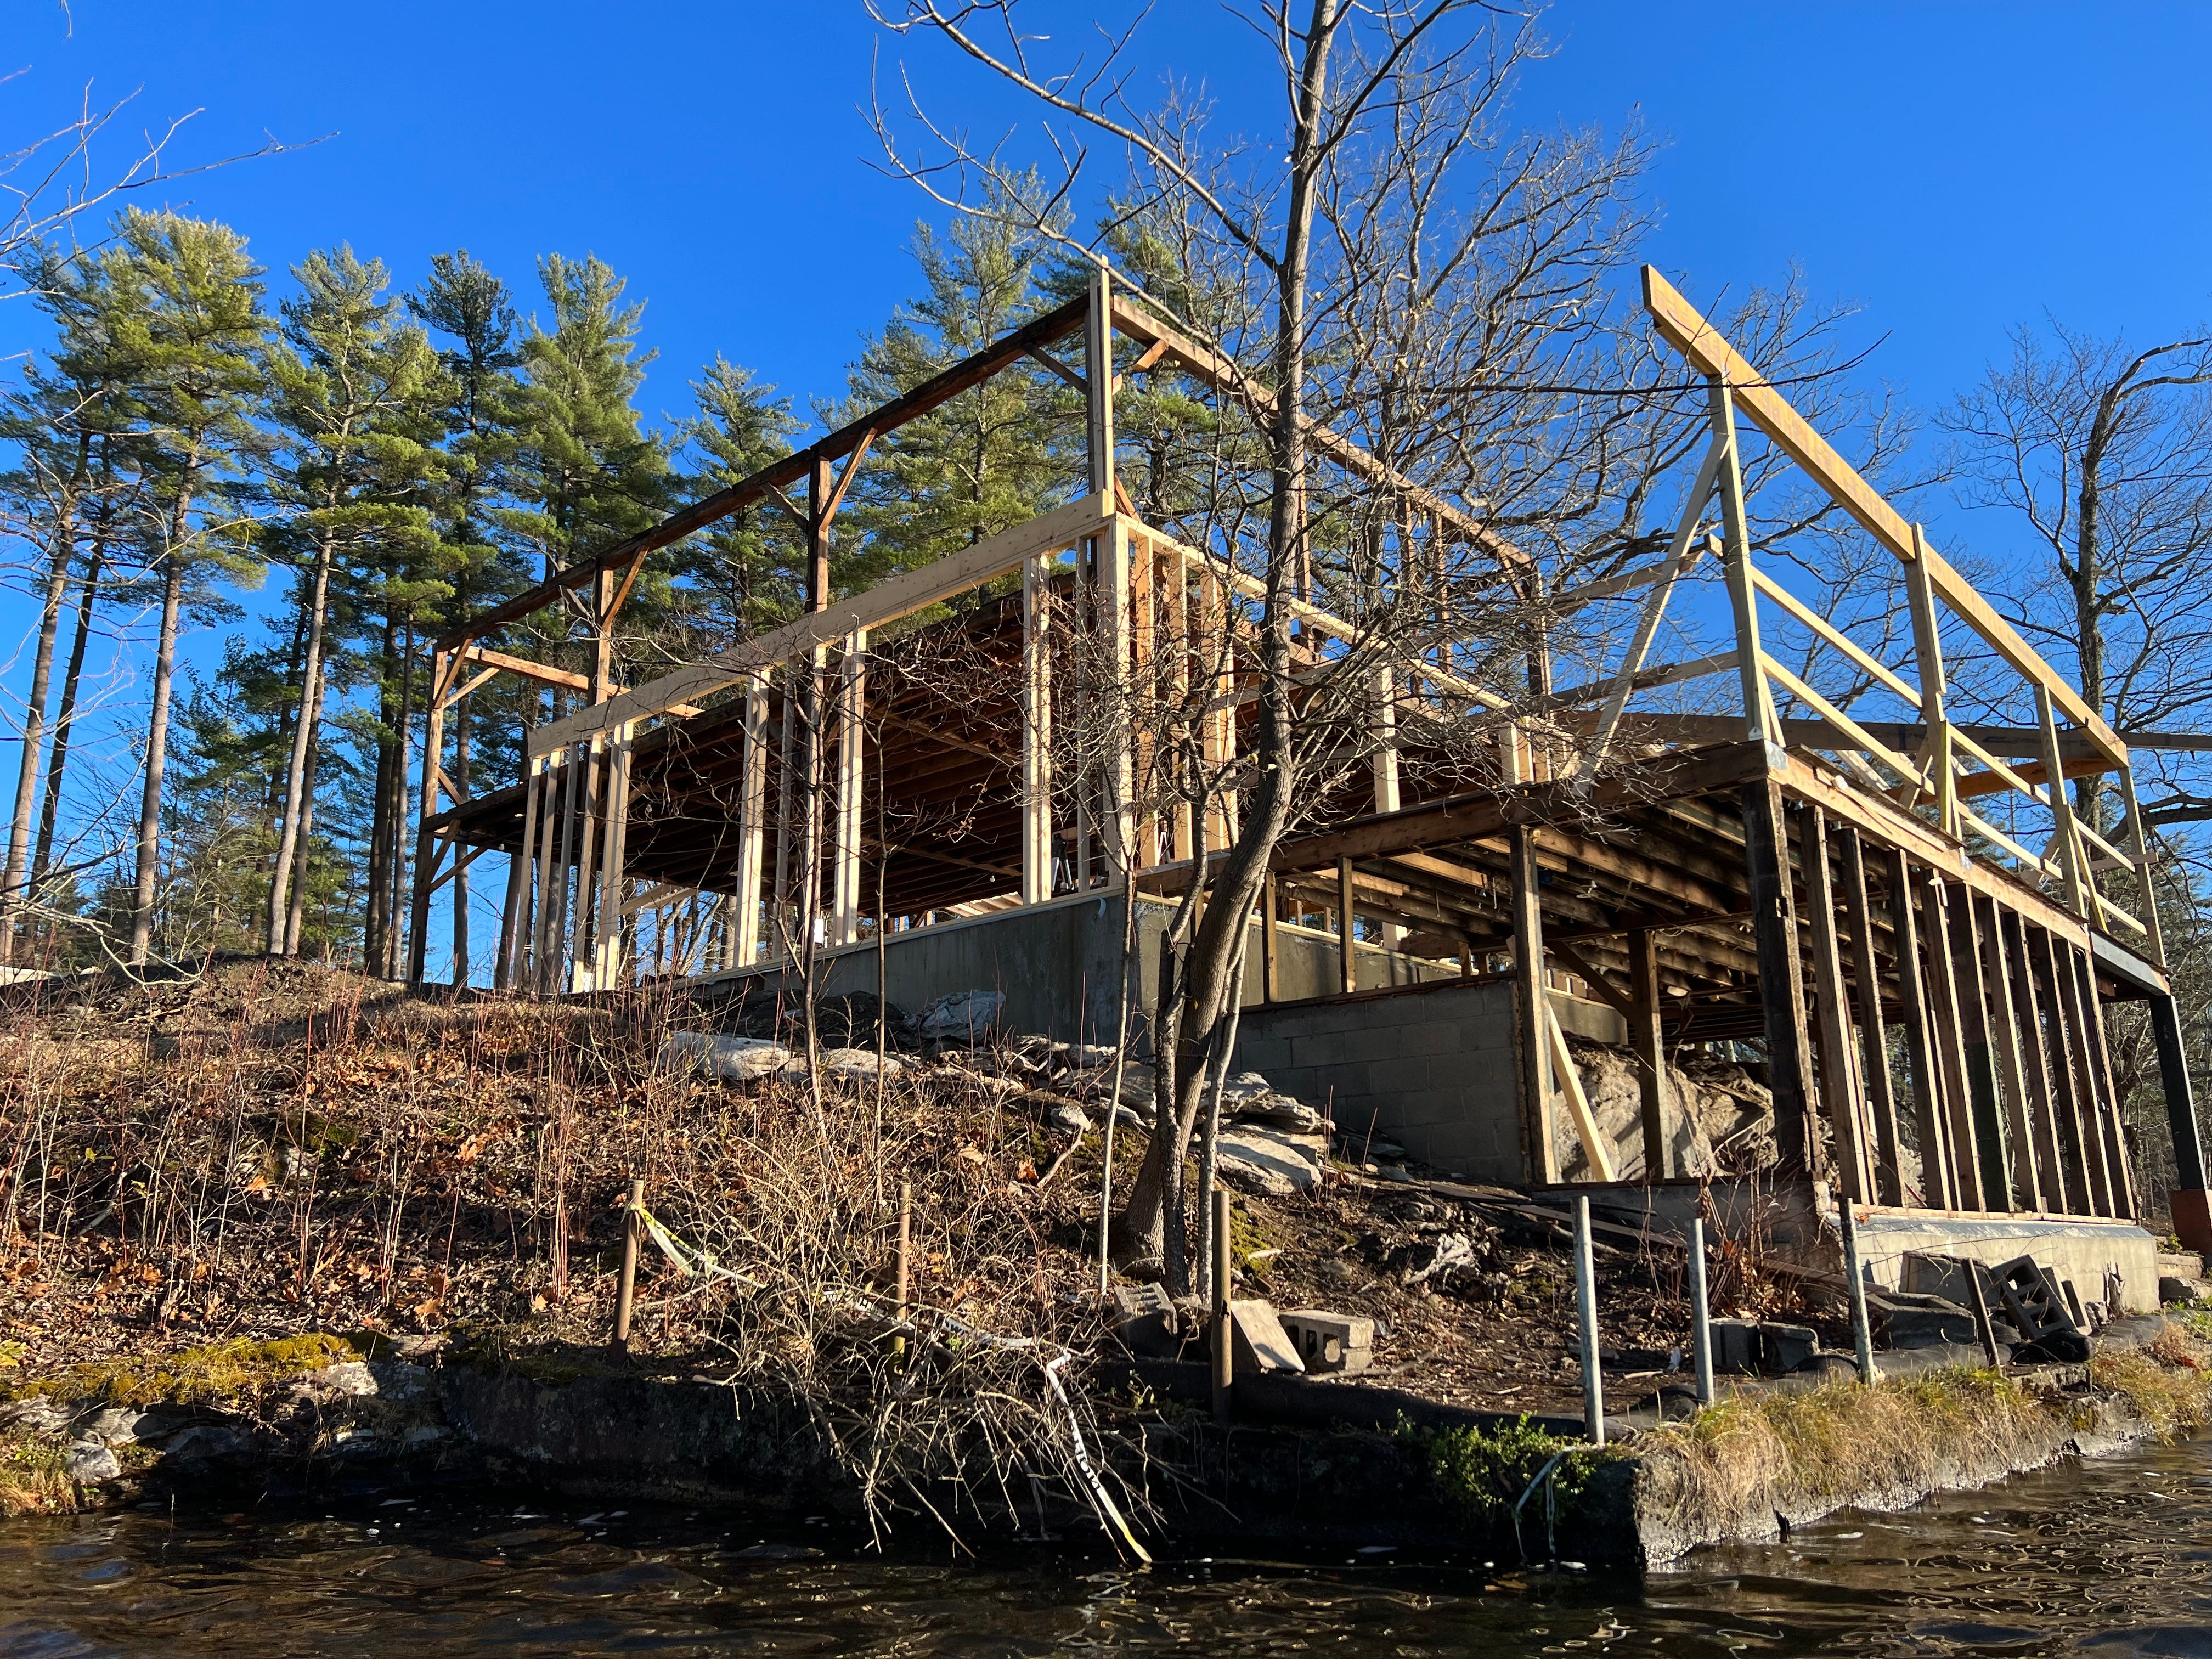 FOLLOW UP (Part Two): Nearly two years on, a 'landscape hotel' is rising at Egremont's Prospect Lake